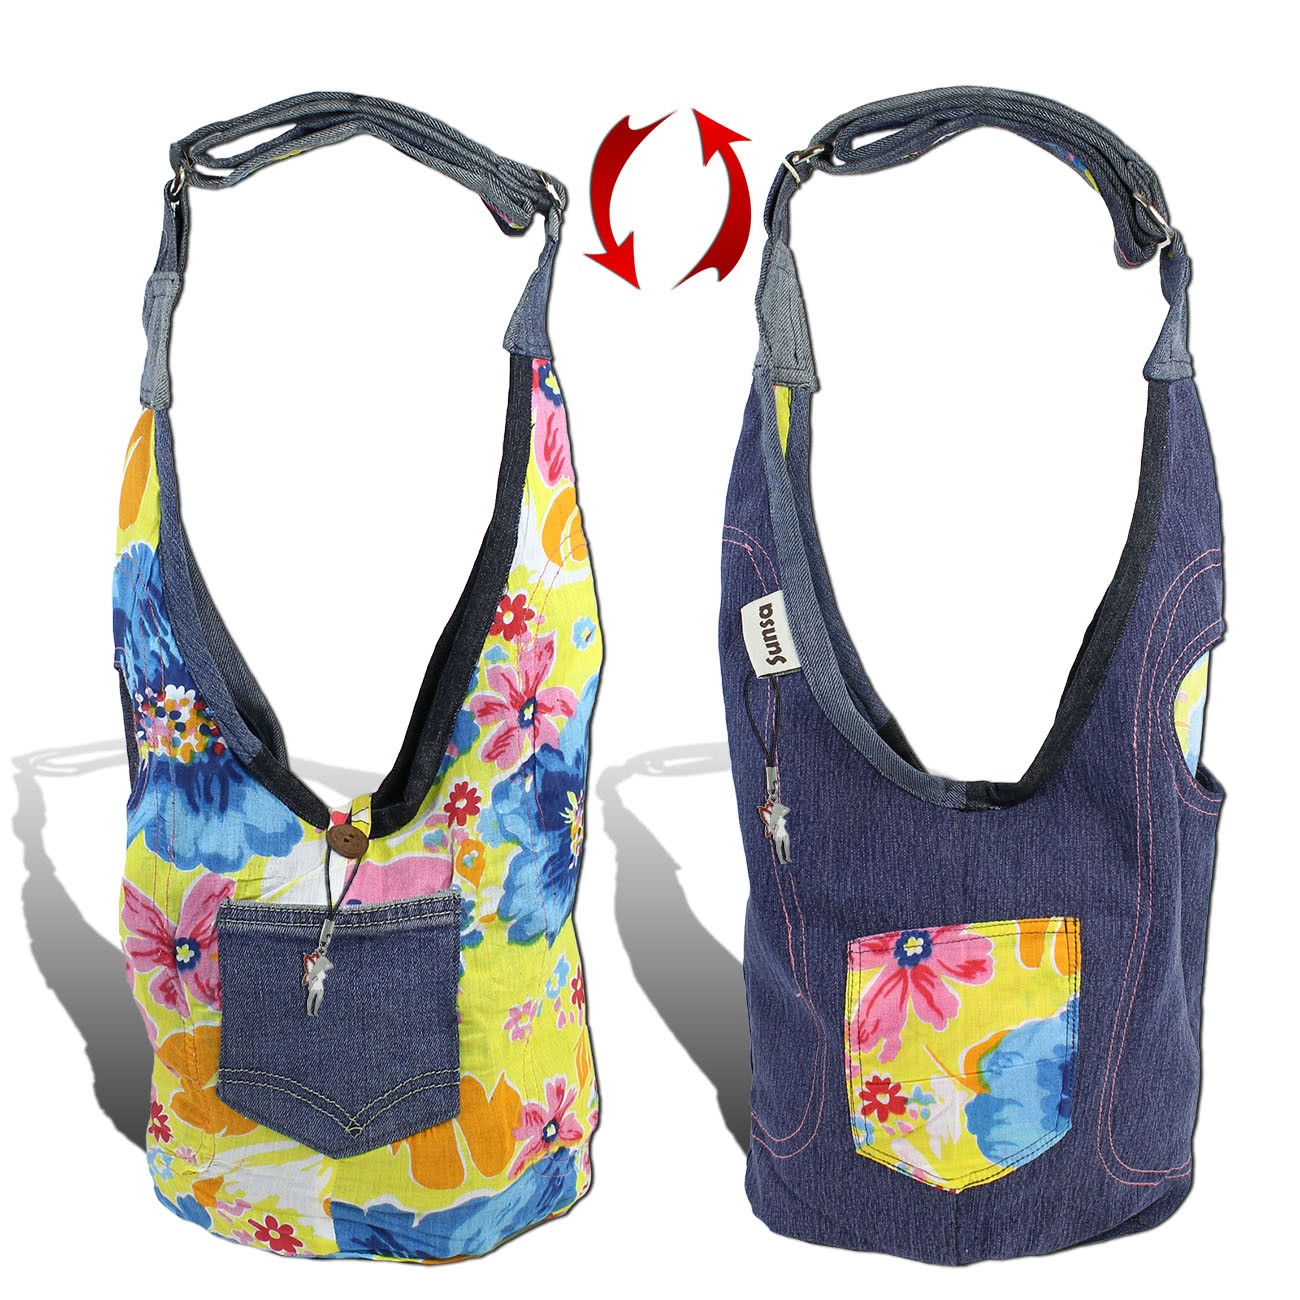 Sunsa Wendetasche Kinder Hobo Bag Canvas/Jeans Upcycling Beuteltasche OTA430BY